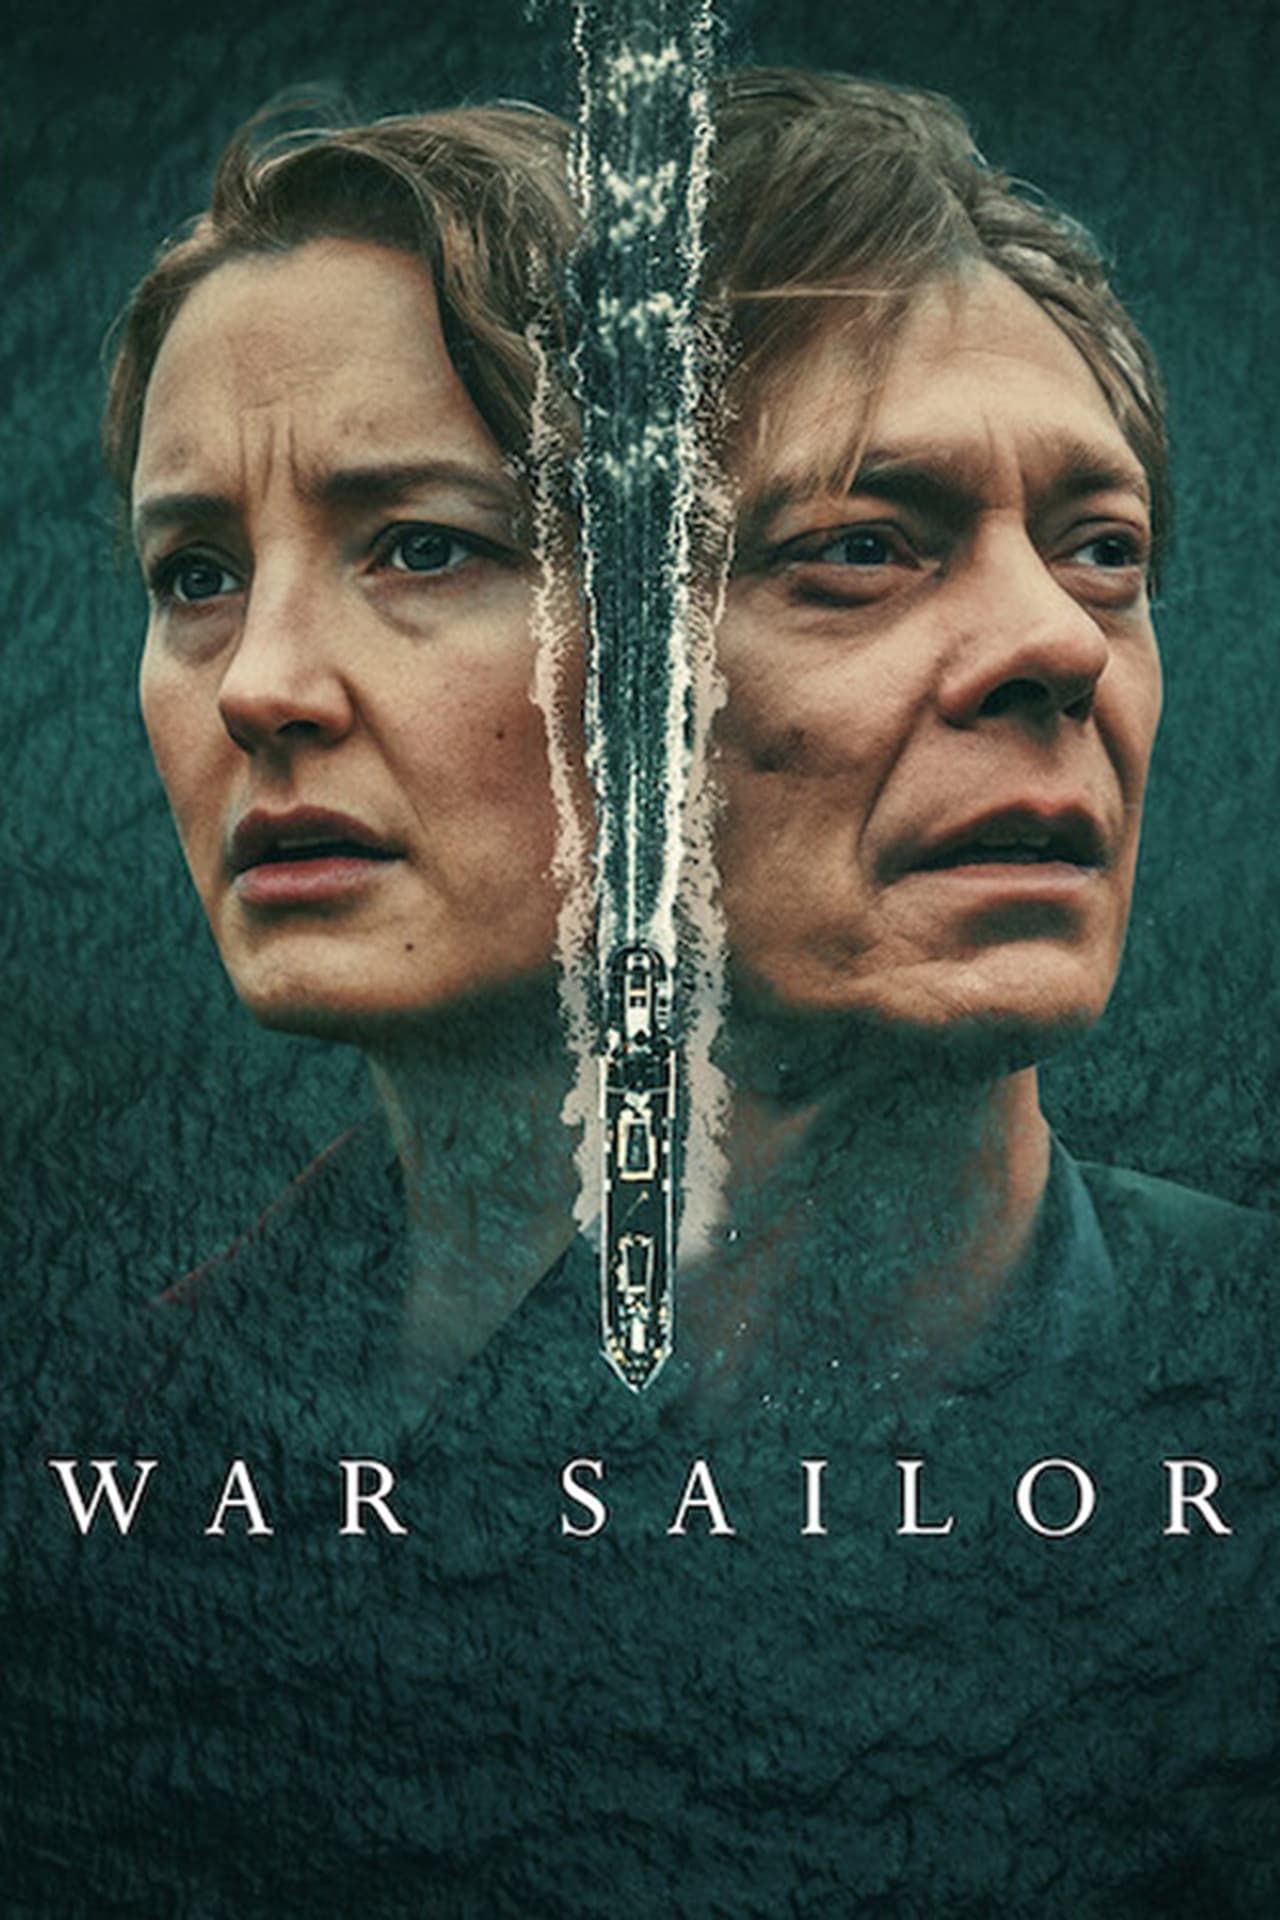 Poster for the television series “War Sailor”